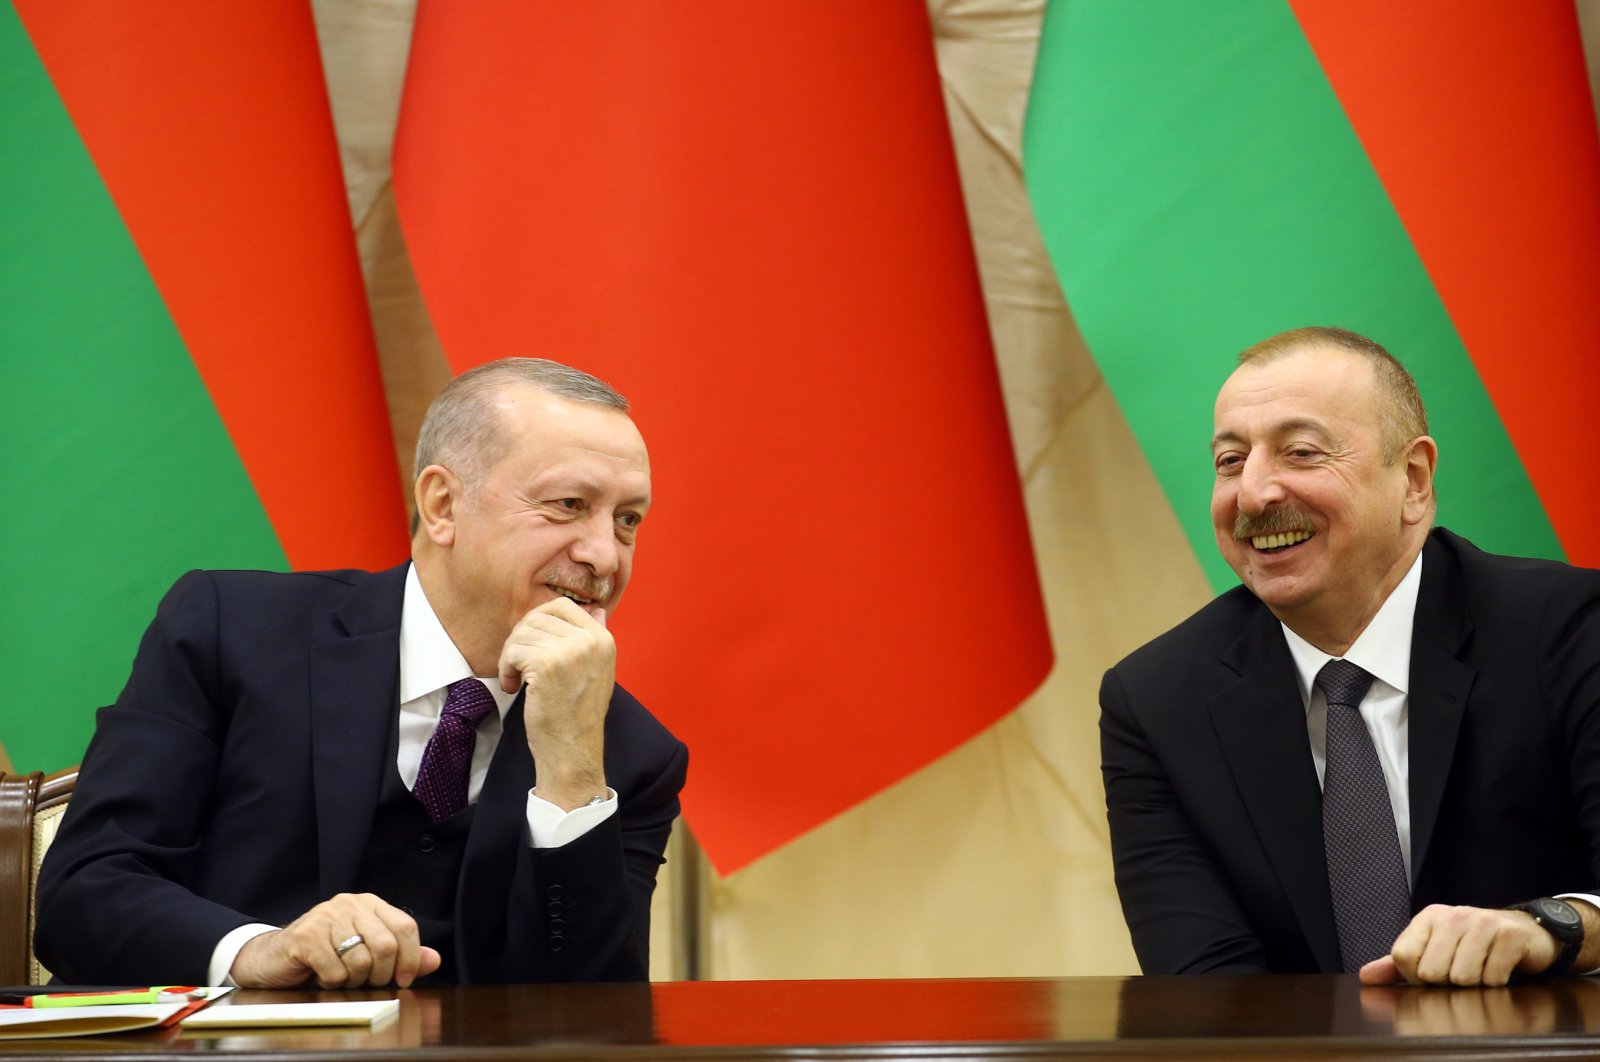 President Recep Tayyip Erdoğan and his Azerbaijani counterpart Ilham Aliyev during a press conference on the eighth meeting of the High-level Strategic Cooperation Council, Baku, Azerbaijan, Feb. 26, 2020. (AA Photo)